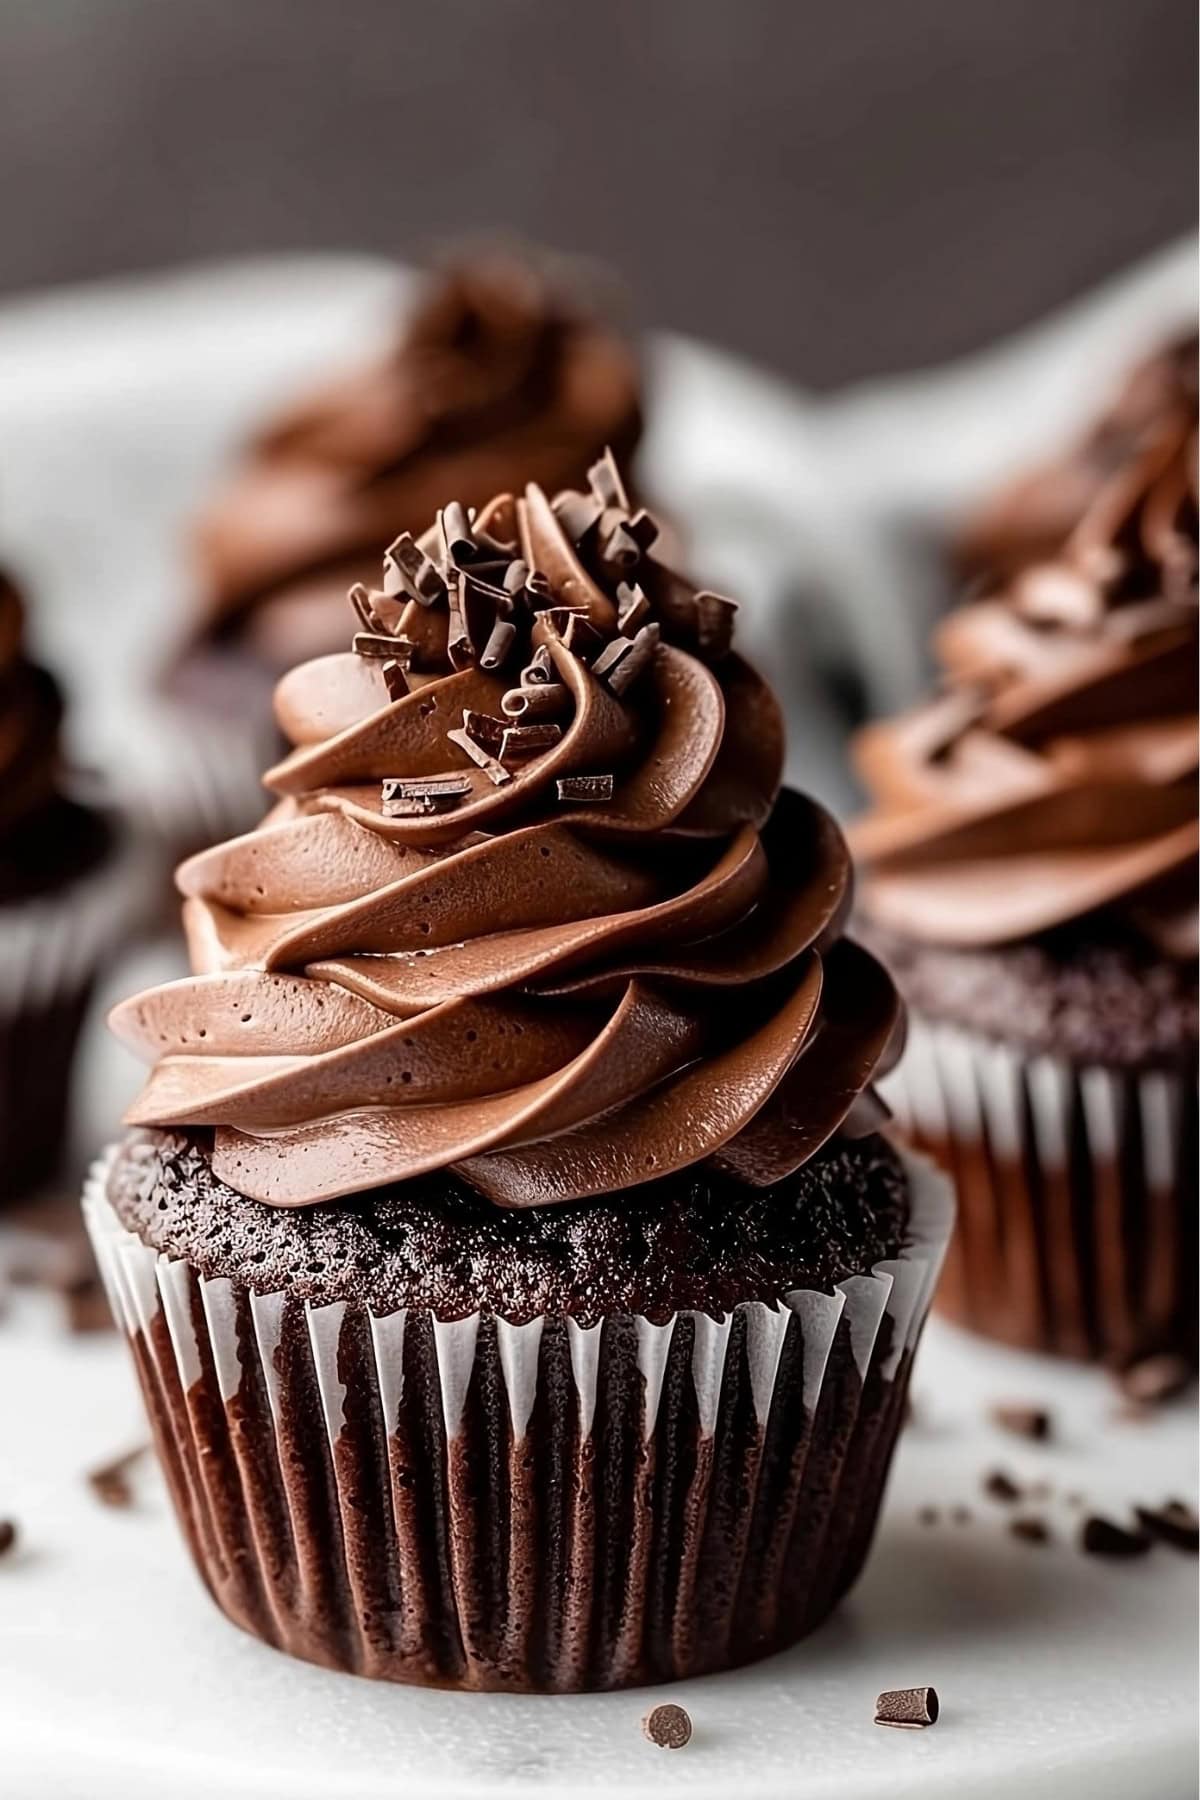 Close-up view of chocolate cupcake with chocolate frosting on top.